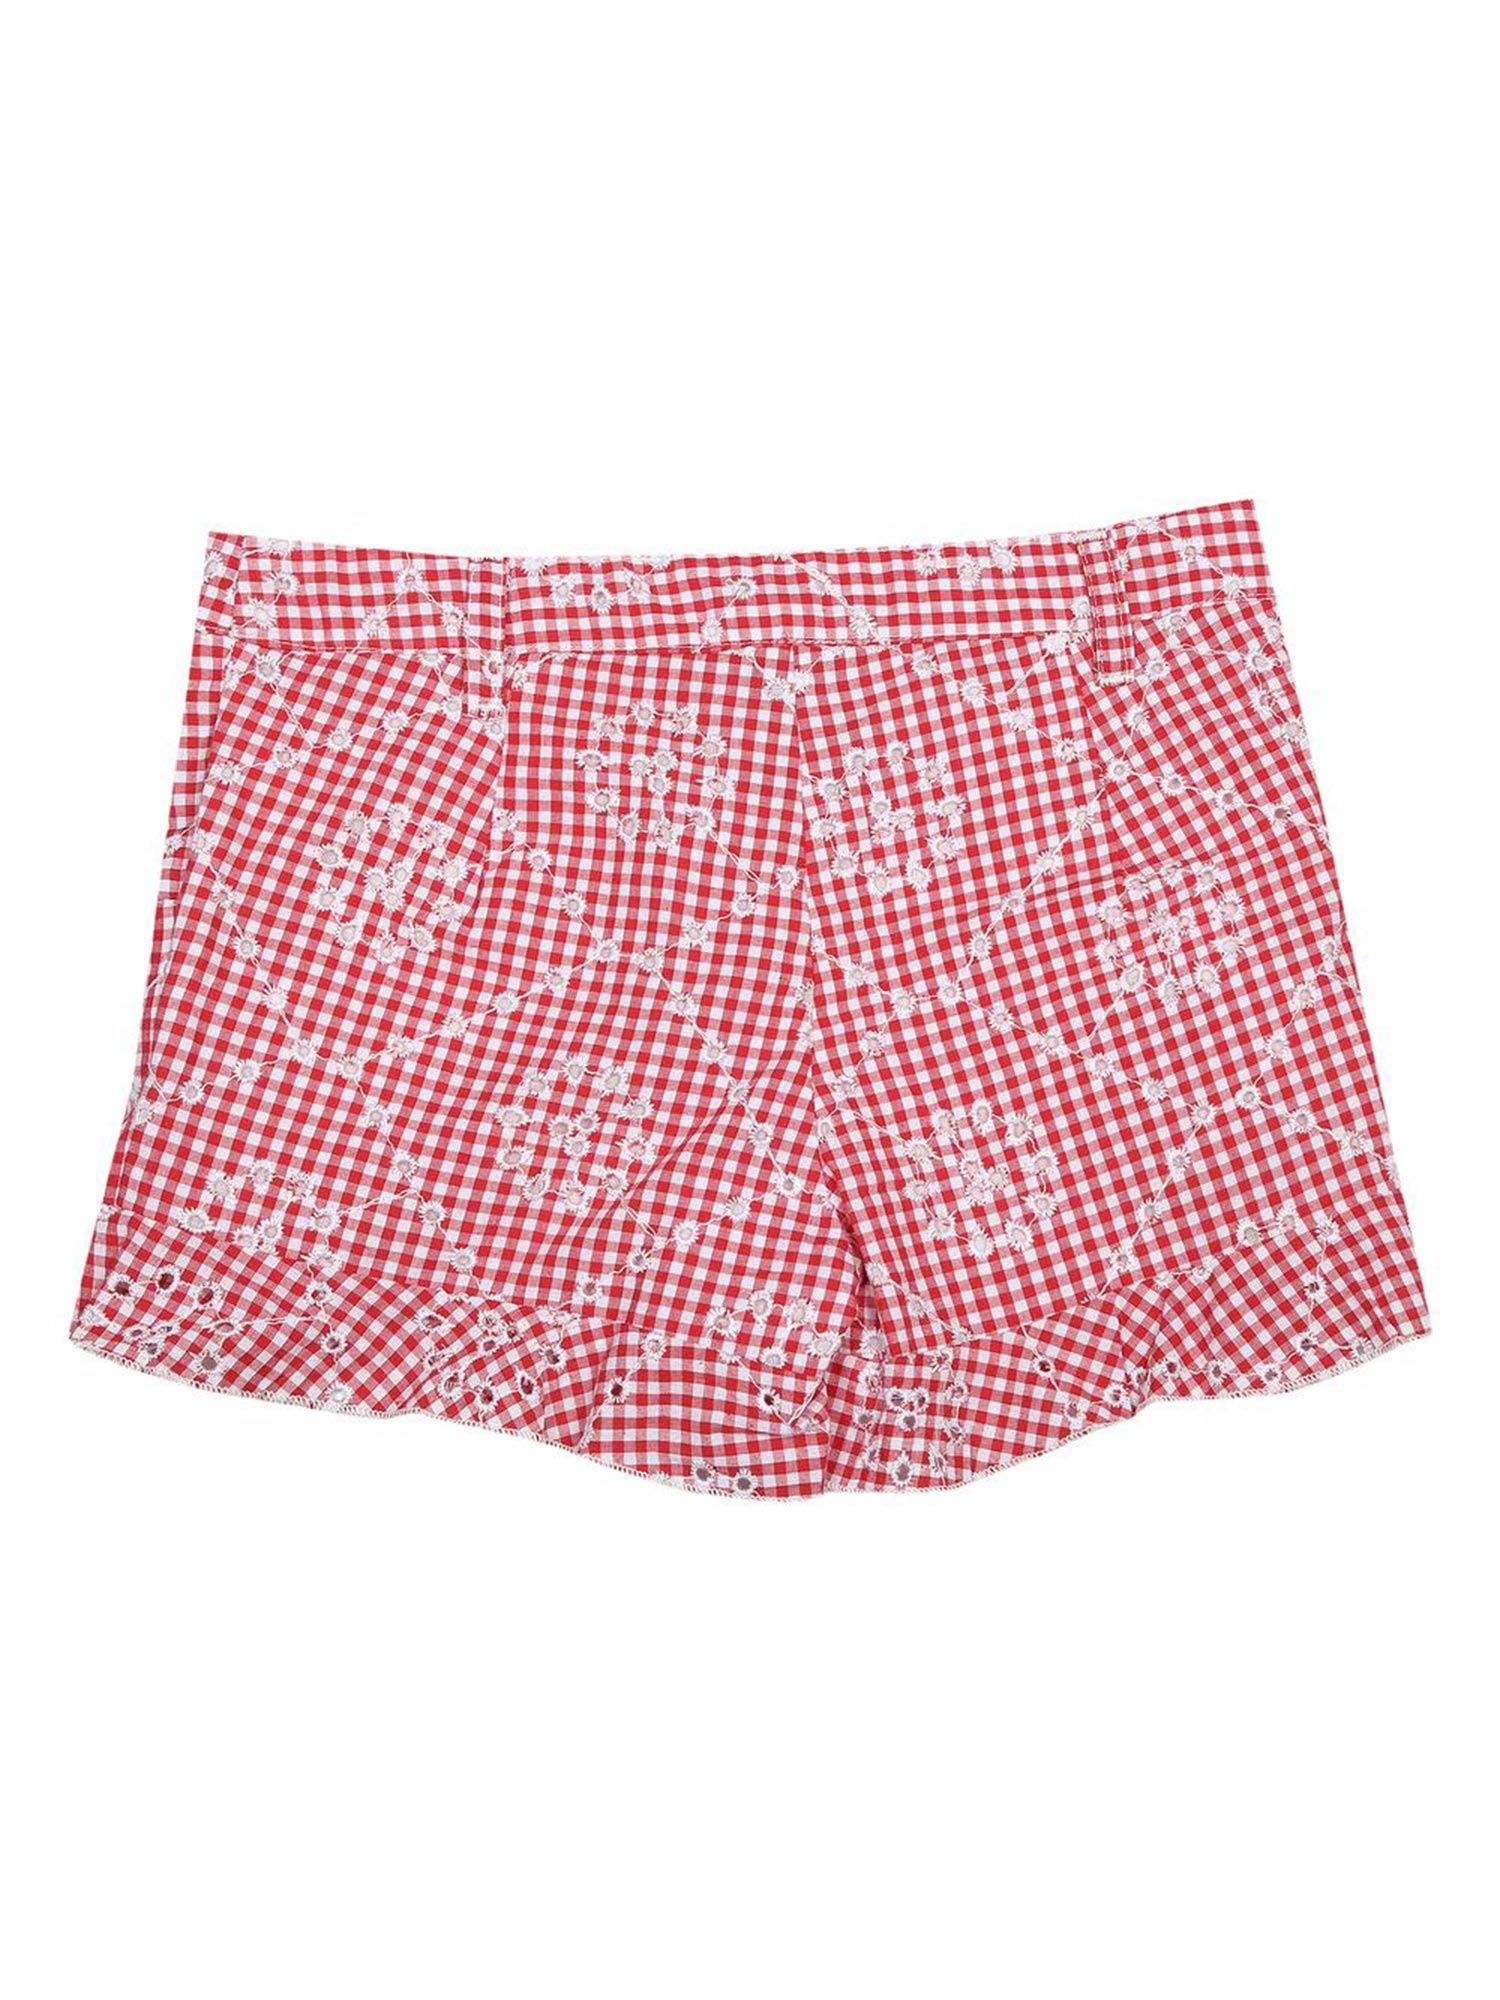 girls red checked shorts